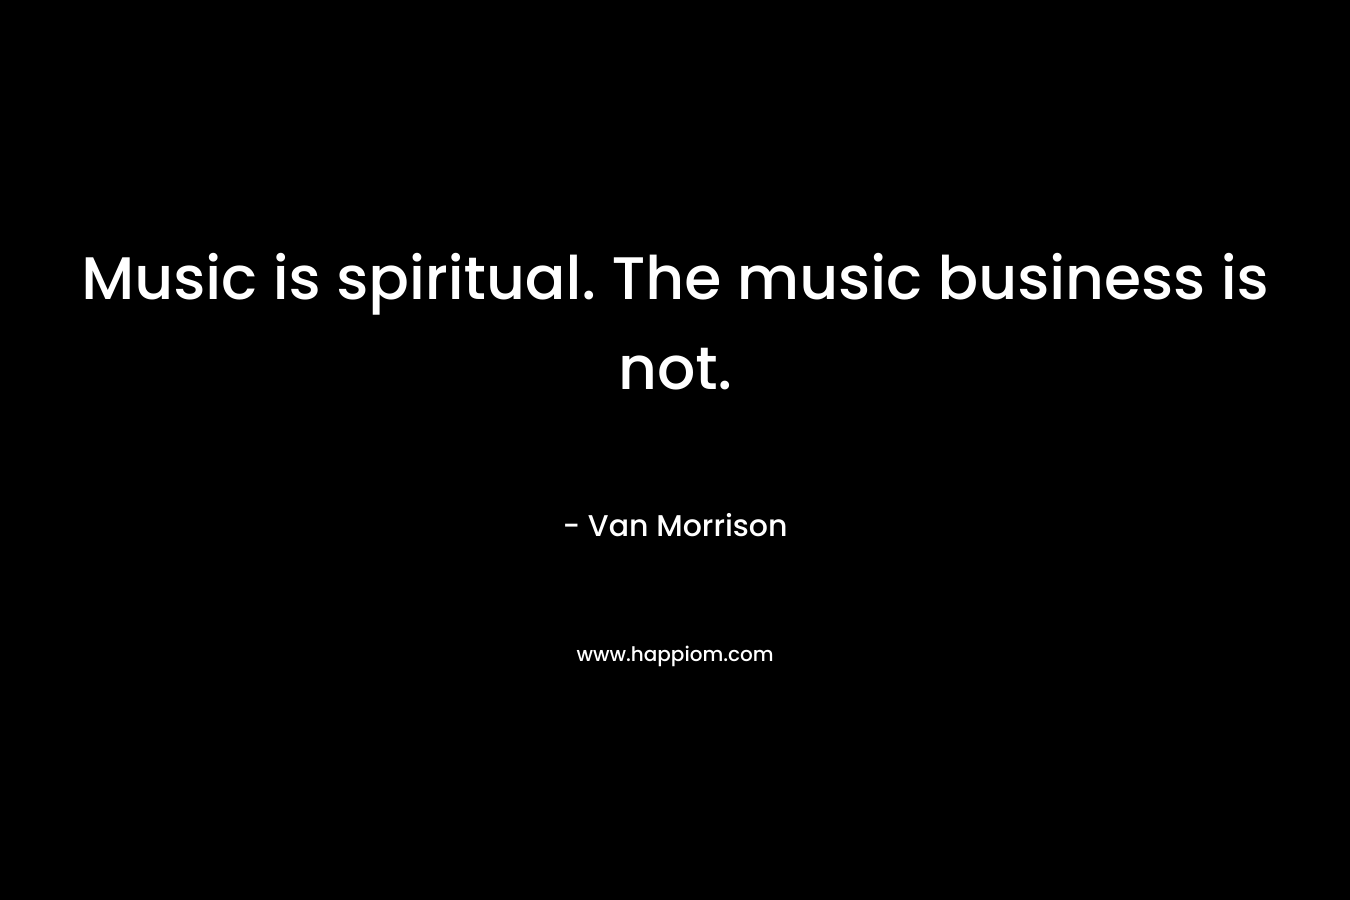 Music is spiritual. The music business is not.